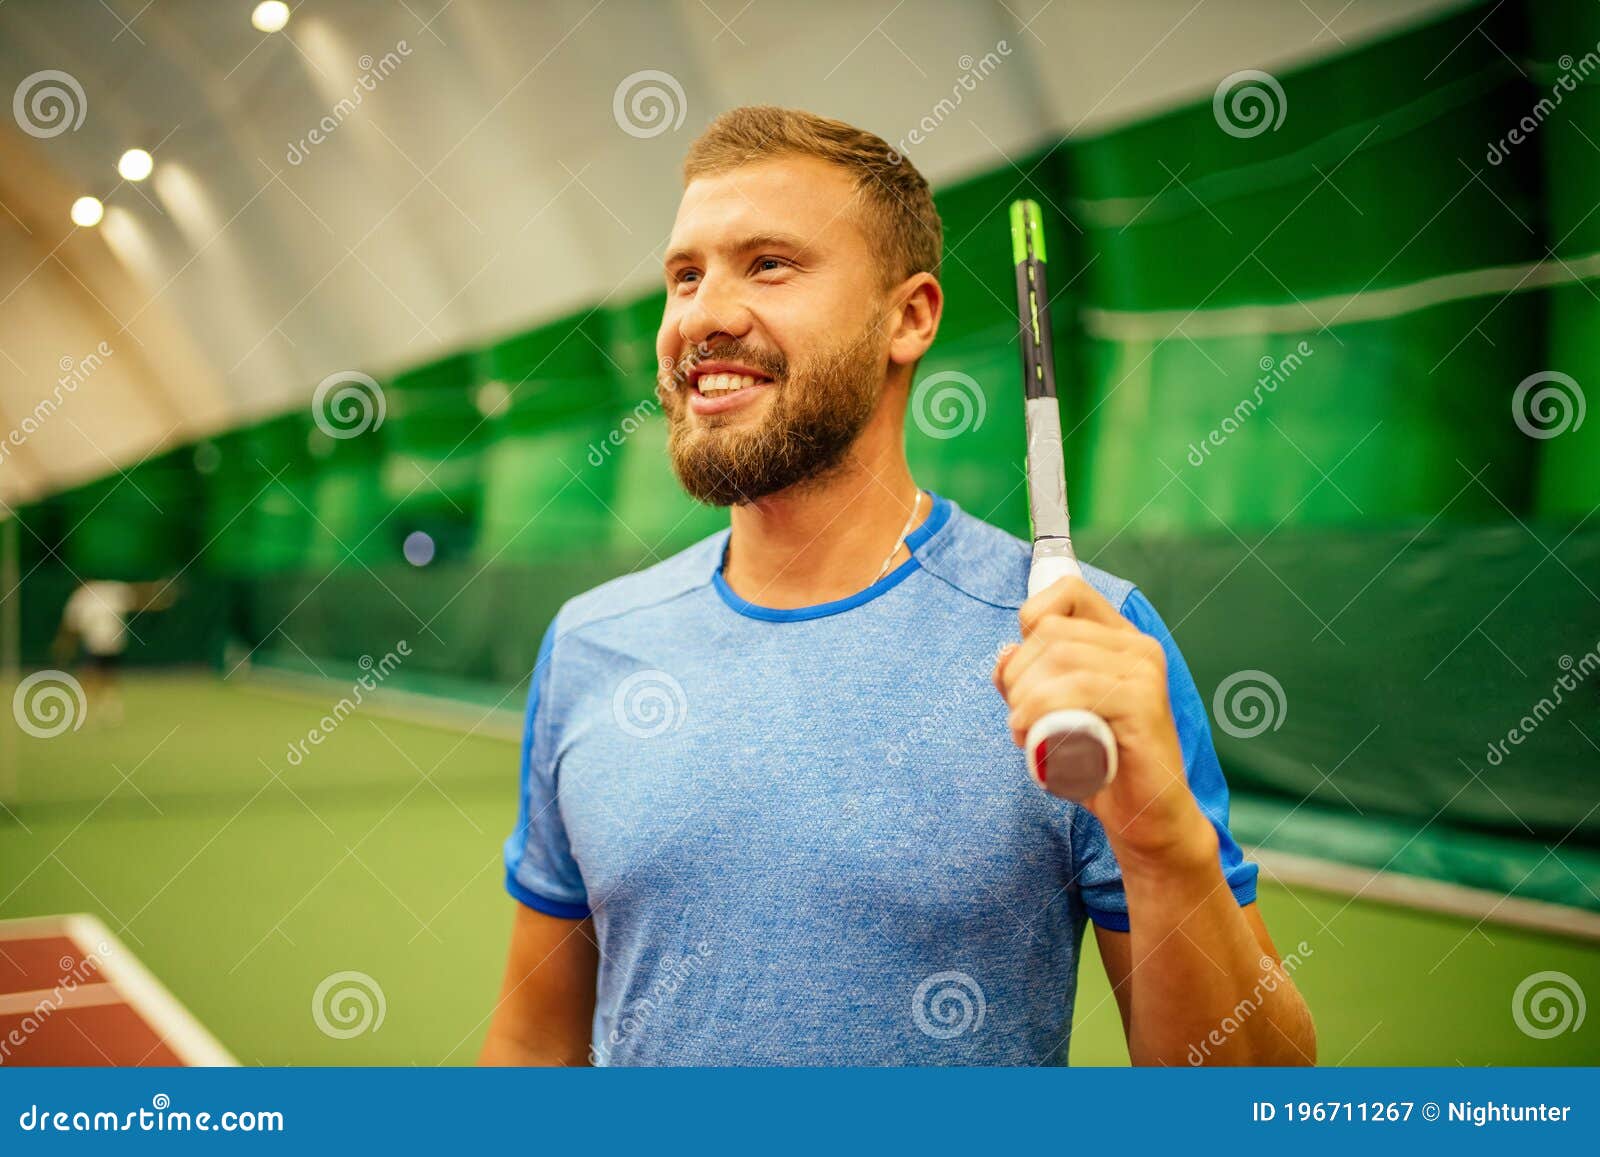 Instructor or Coach Teaching How To Play Tennis on a Court Indoor Stock ...